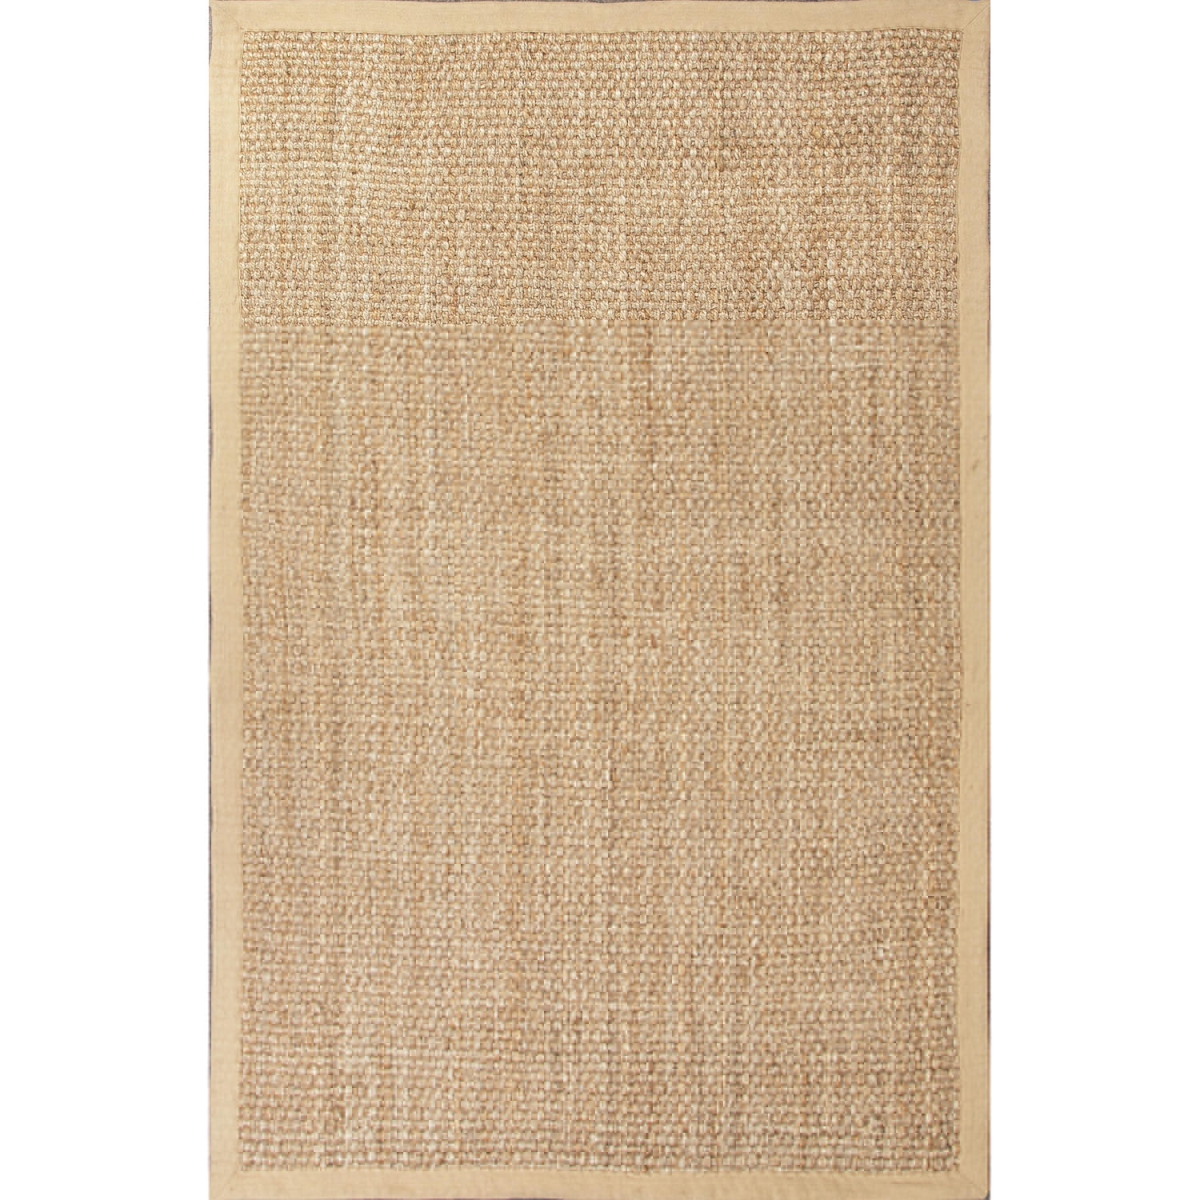 Picture of Jaipur Rugs RUG123688 Naturals Lucia Handspun Jute 2 by 2 Adesina Design Rectangle Rug, Warm Sand - 9 x 12 ft.